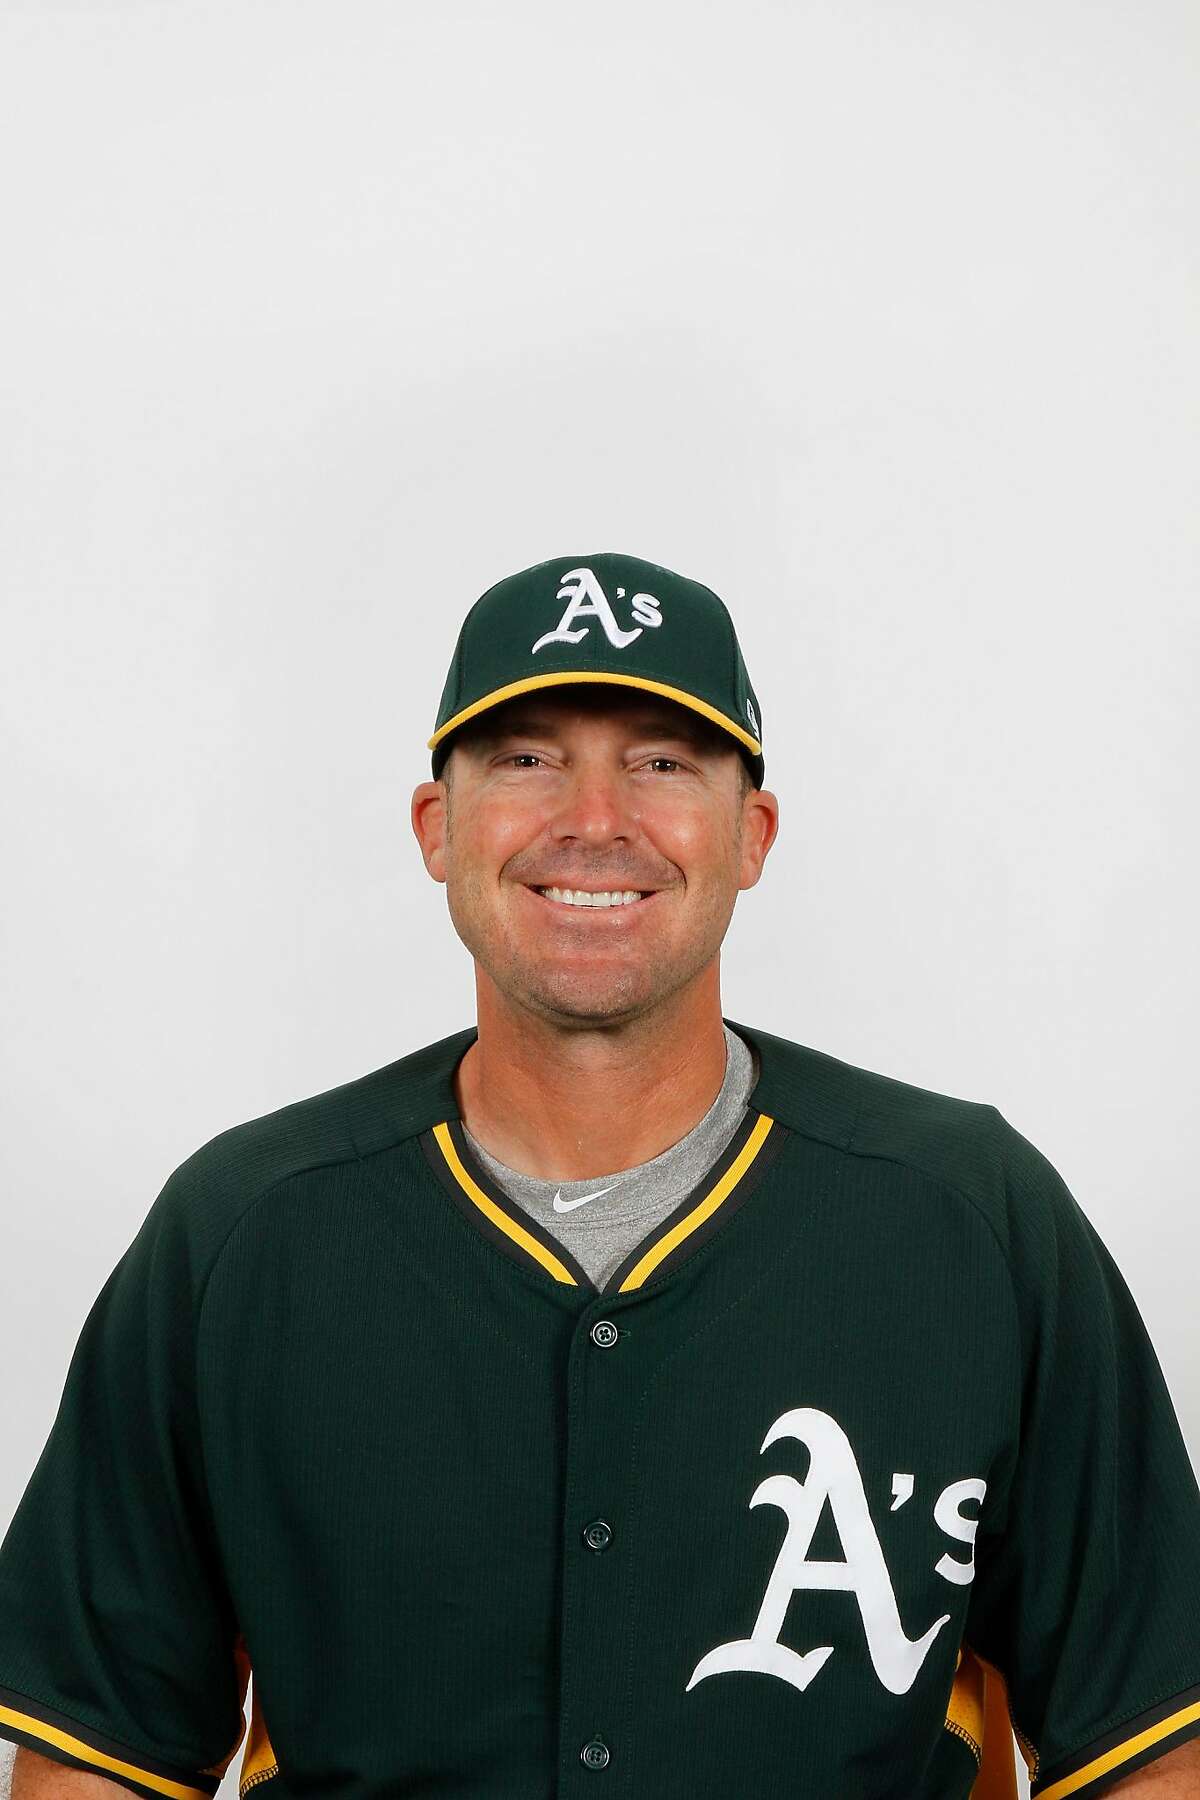 The Oakland Athletics named Ryan Christenson�as their new bench coach on Oct. 19, 2017. Christenson managed at Triple-A Nashville in the 2017 season.